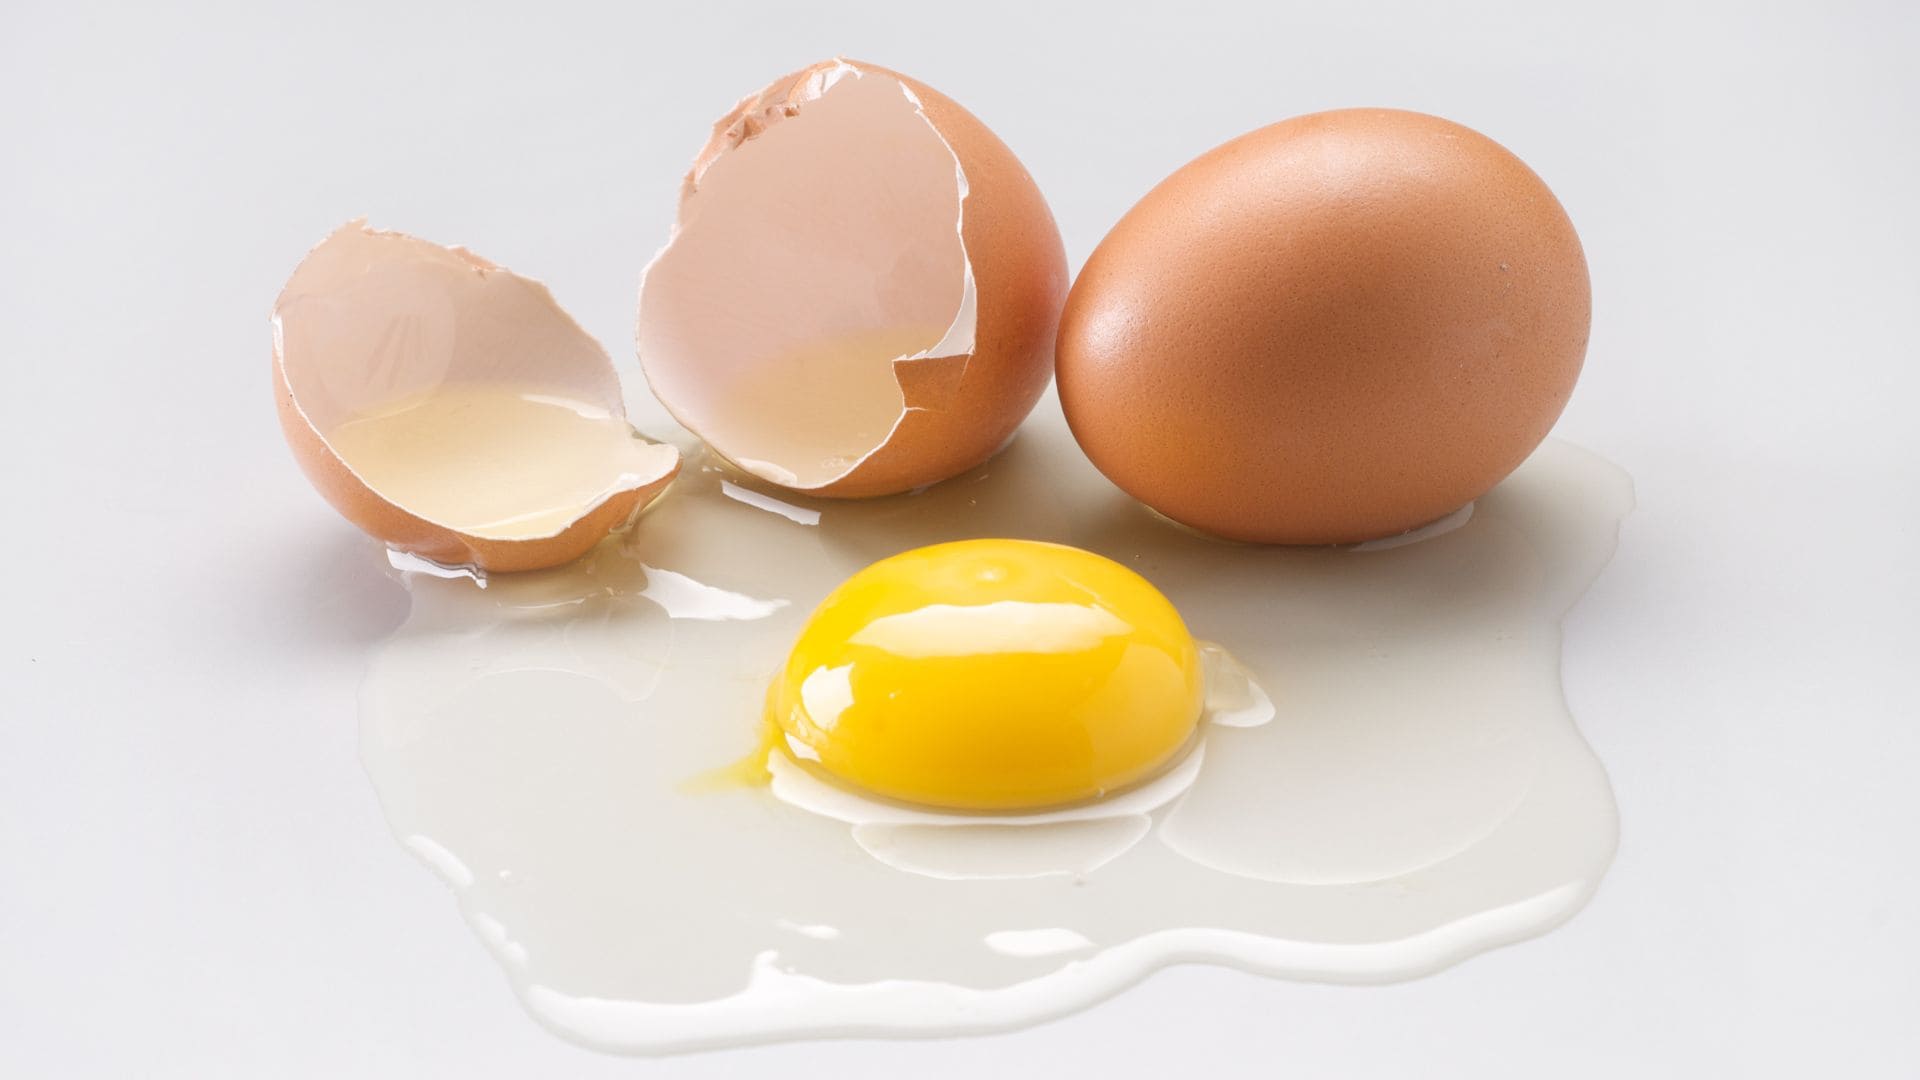 Find out how much proteins an egg could have